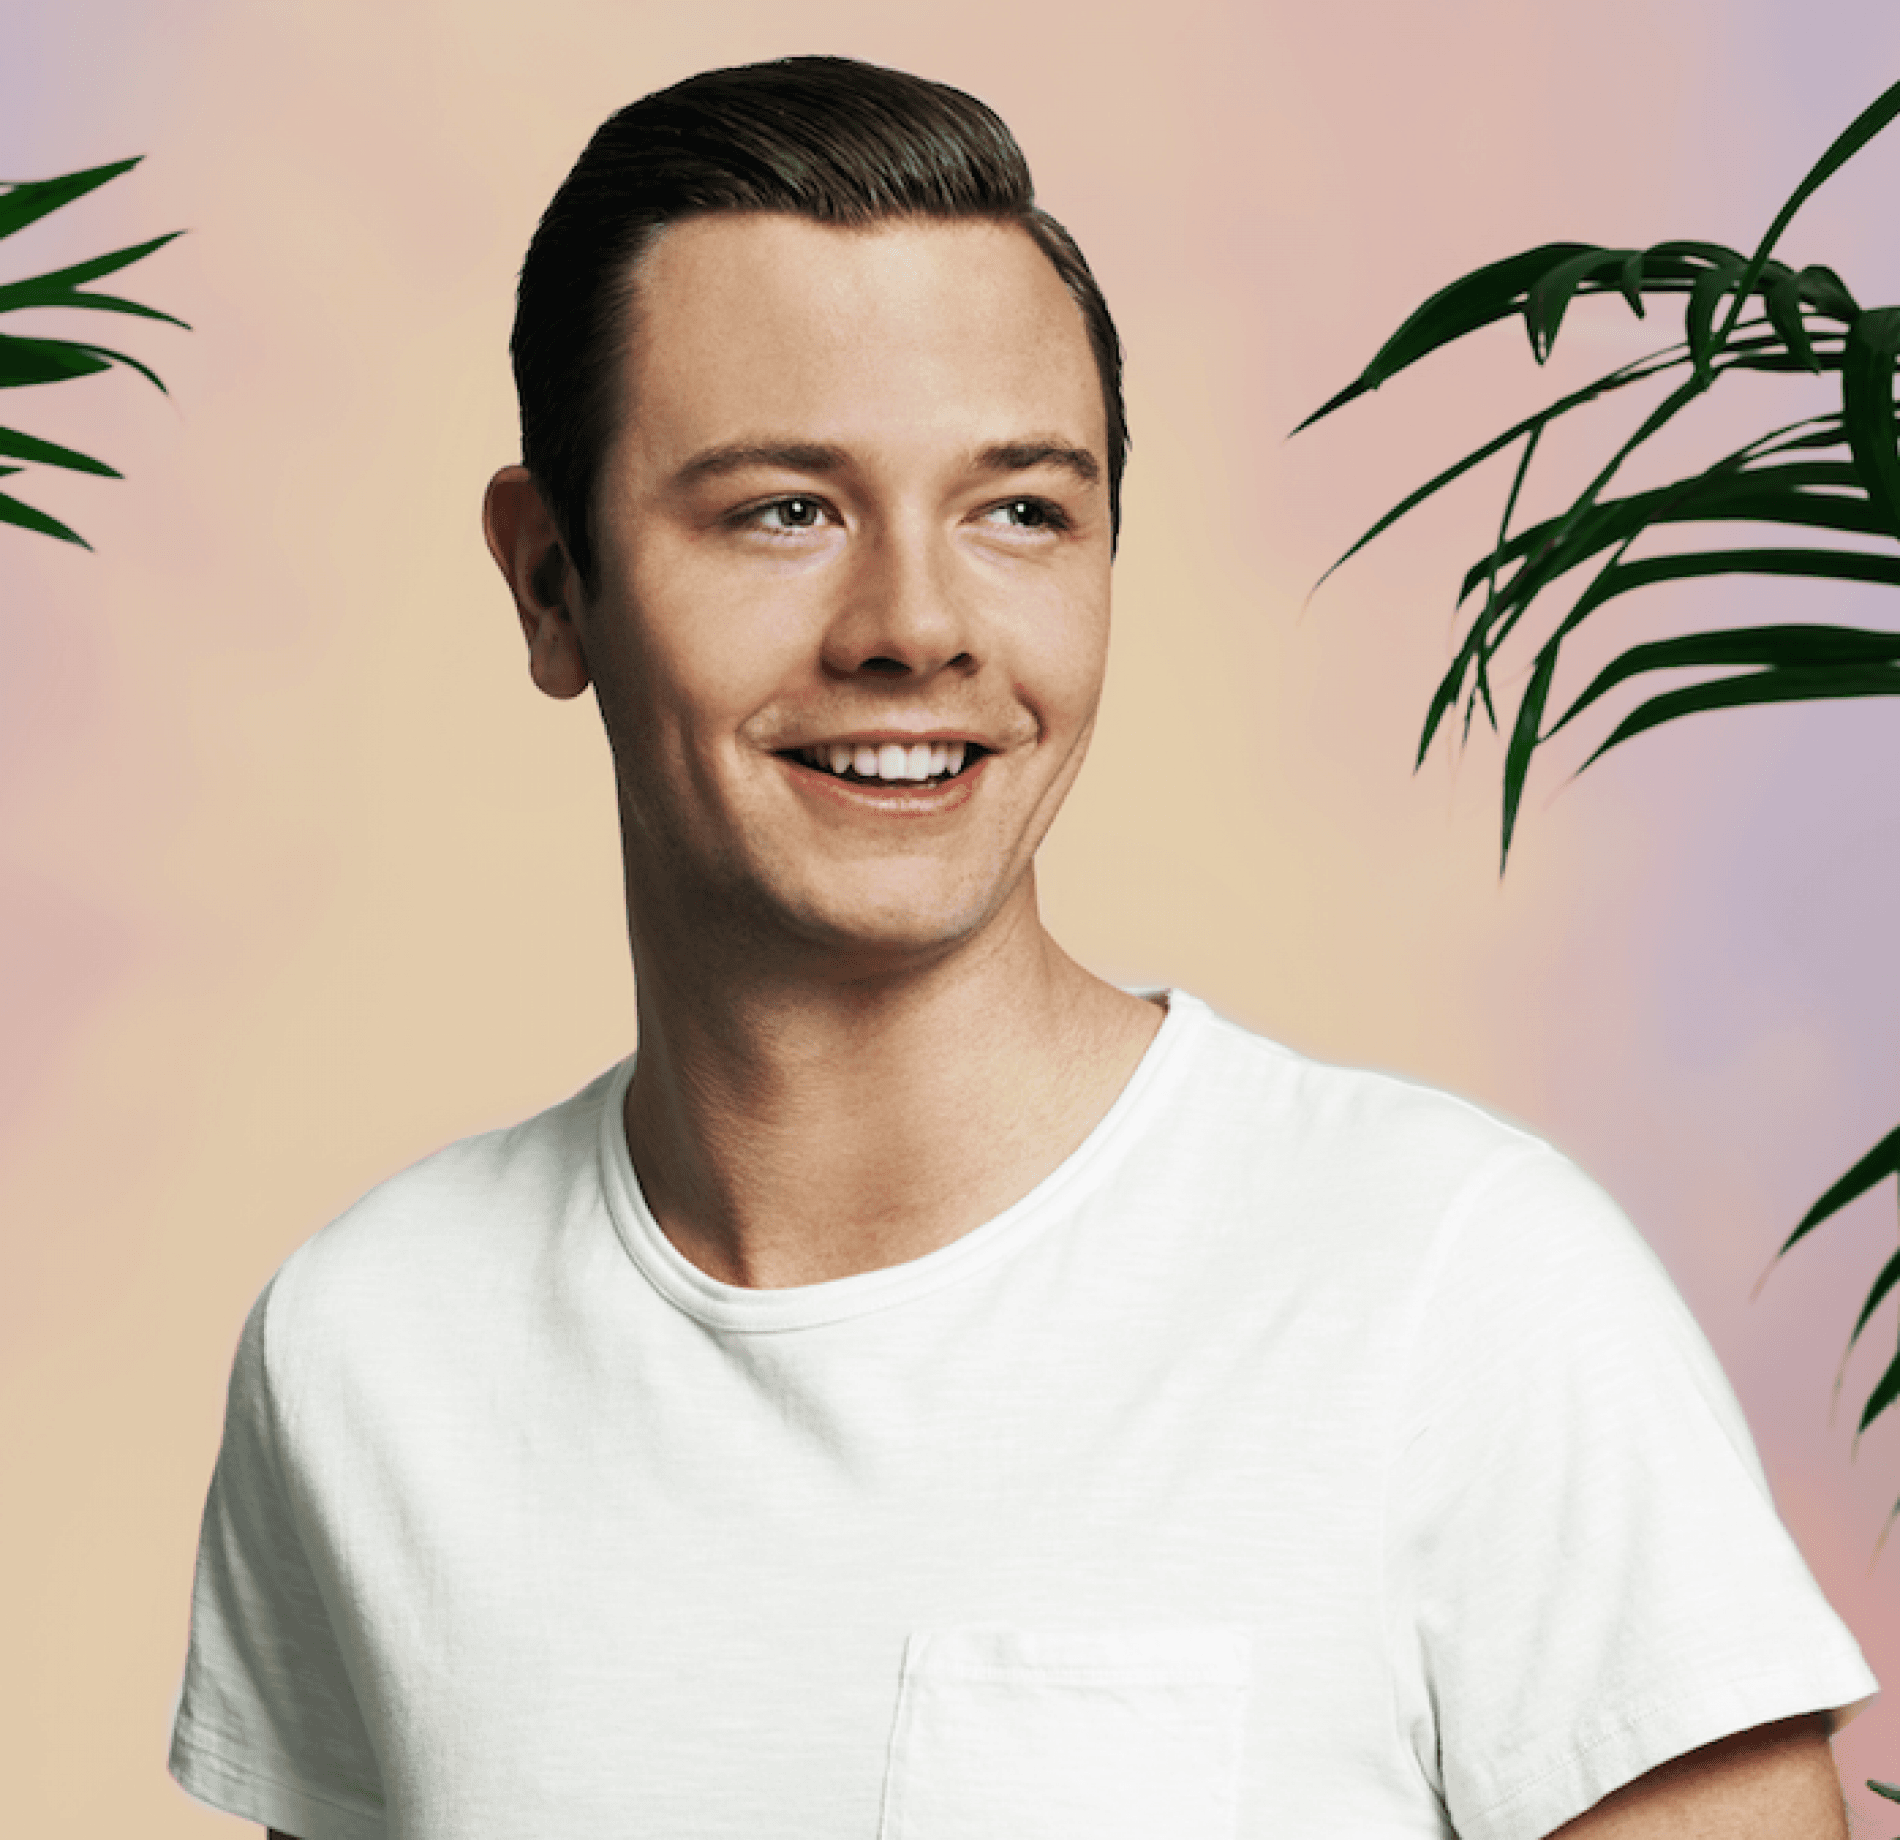 Welcome to Ibiza! Your guide: Sam Feldt